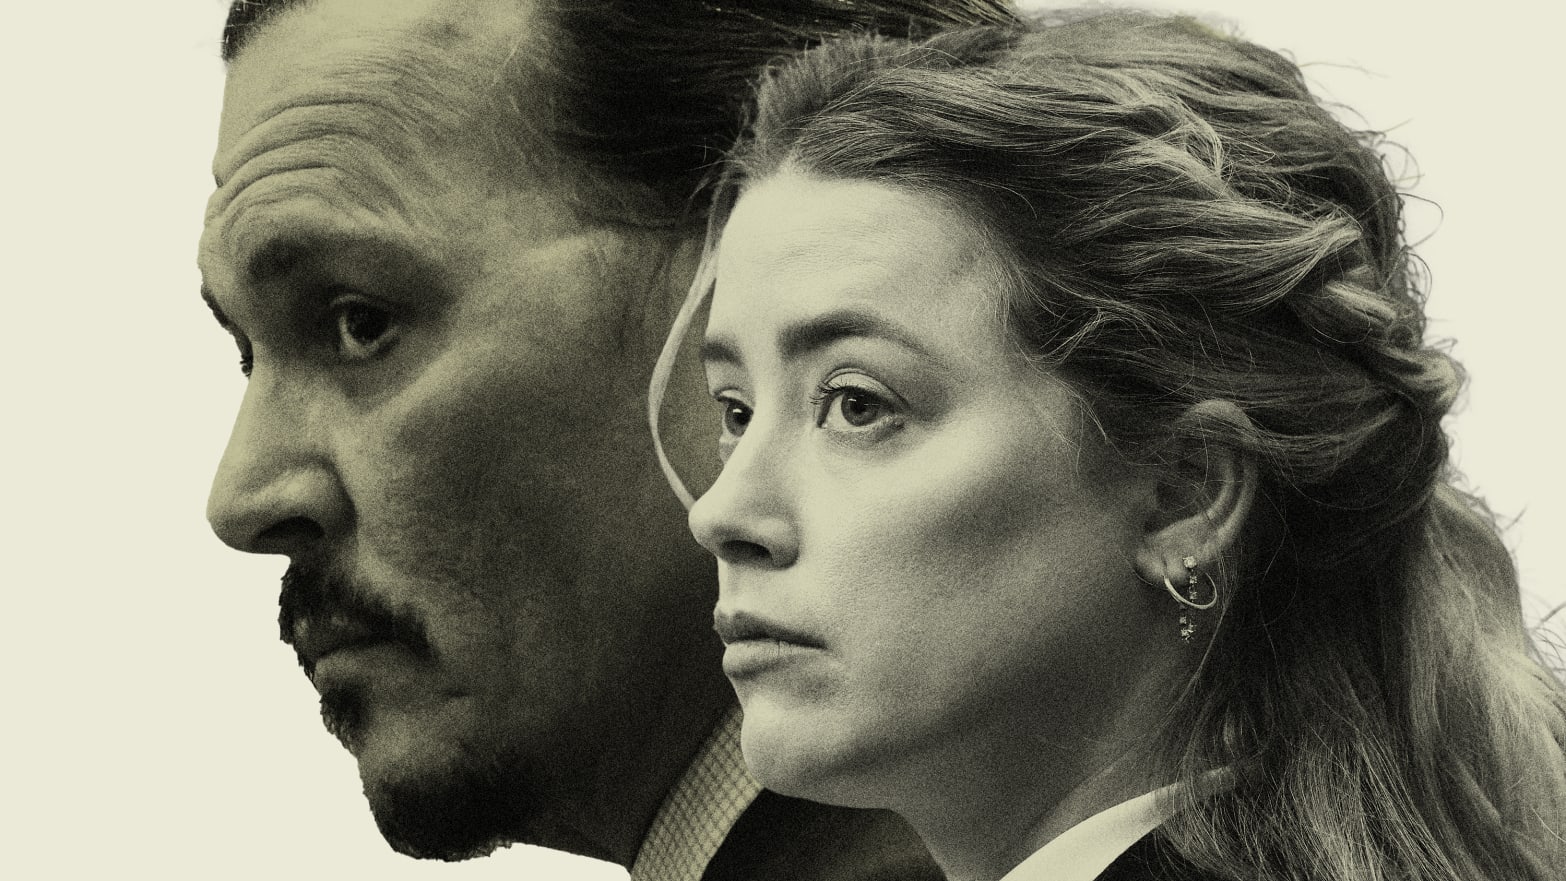 Breaking Down the Johnny Depp-Amber Heard Trials Most Explosive Allegations